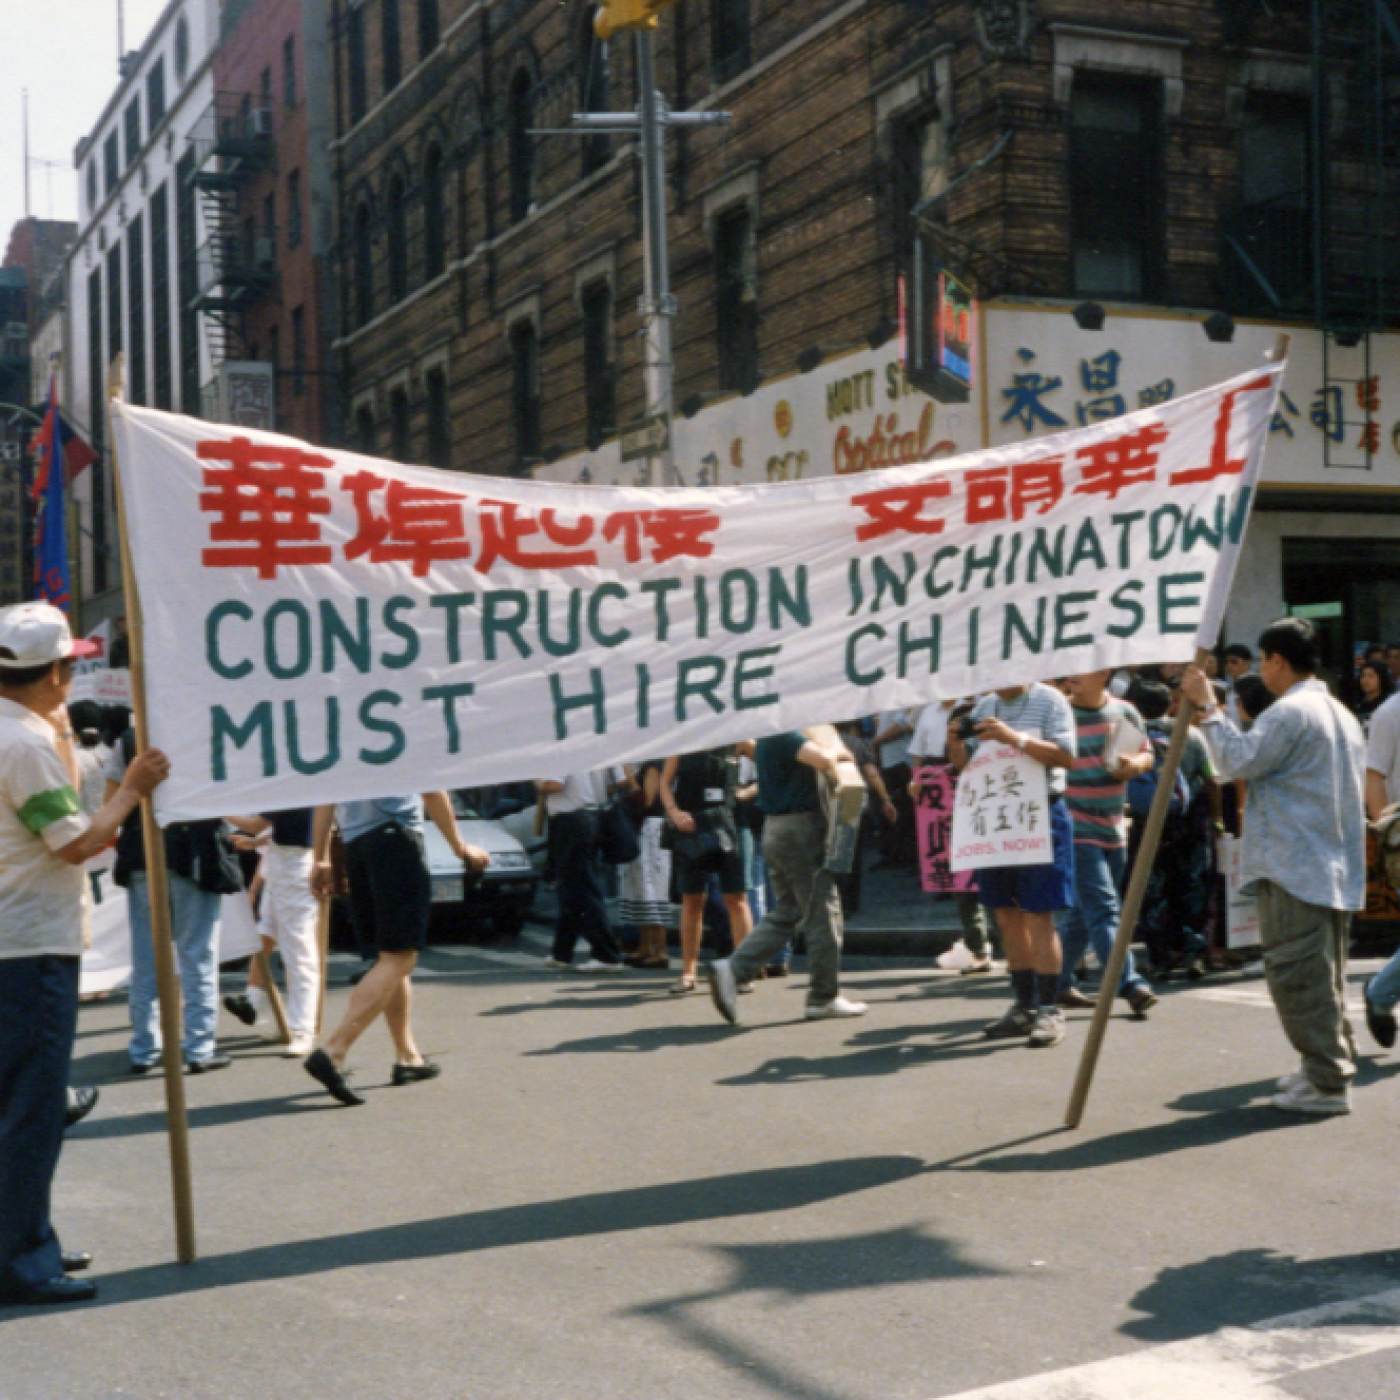 Photograph taken by MOCA staff at the August 1992 demonstrations of the Campaign for Economic Justice at Foley Square, co-organized by the Chinese Construction Workers’ Association (CCWA) and the Chinese Staff Workers Association (CSWA). MOCA Institutional Archives.